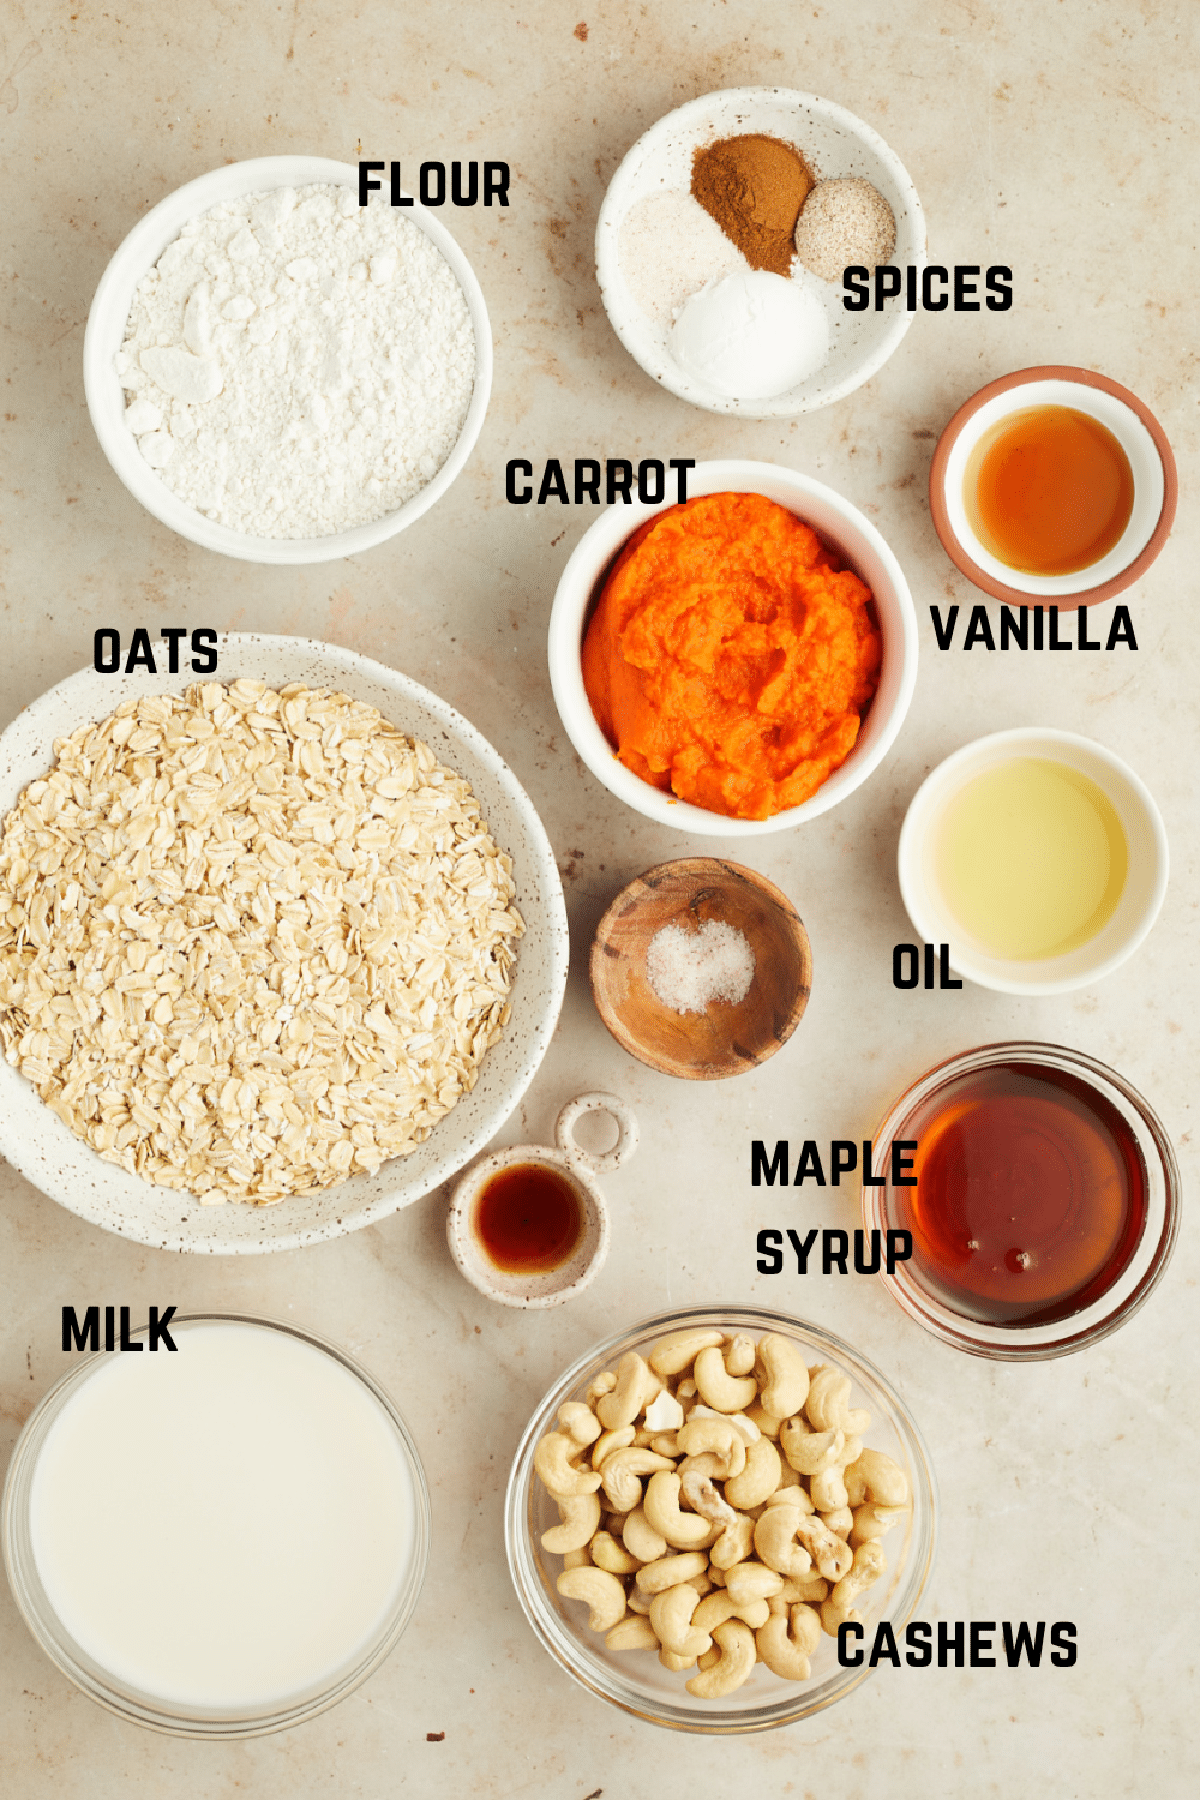 Overhead view of ingredients to make carrot pancakes: flour, oats, carrot, spices, vanilla, oil, maple syrup, cashews, and milk.